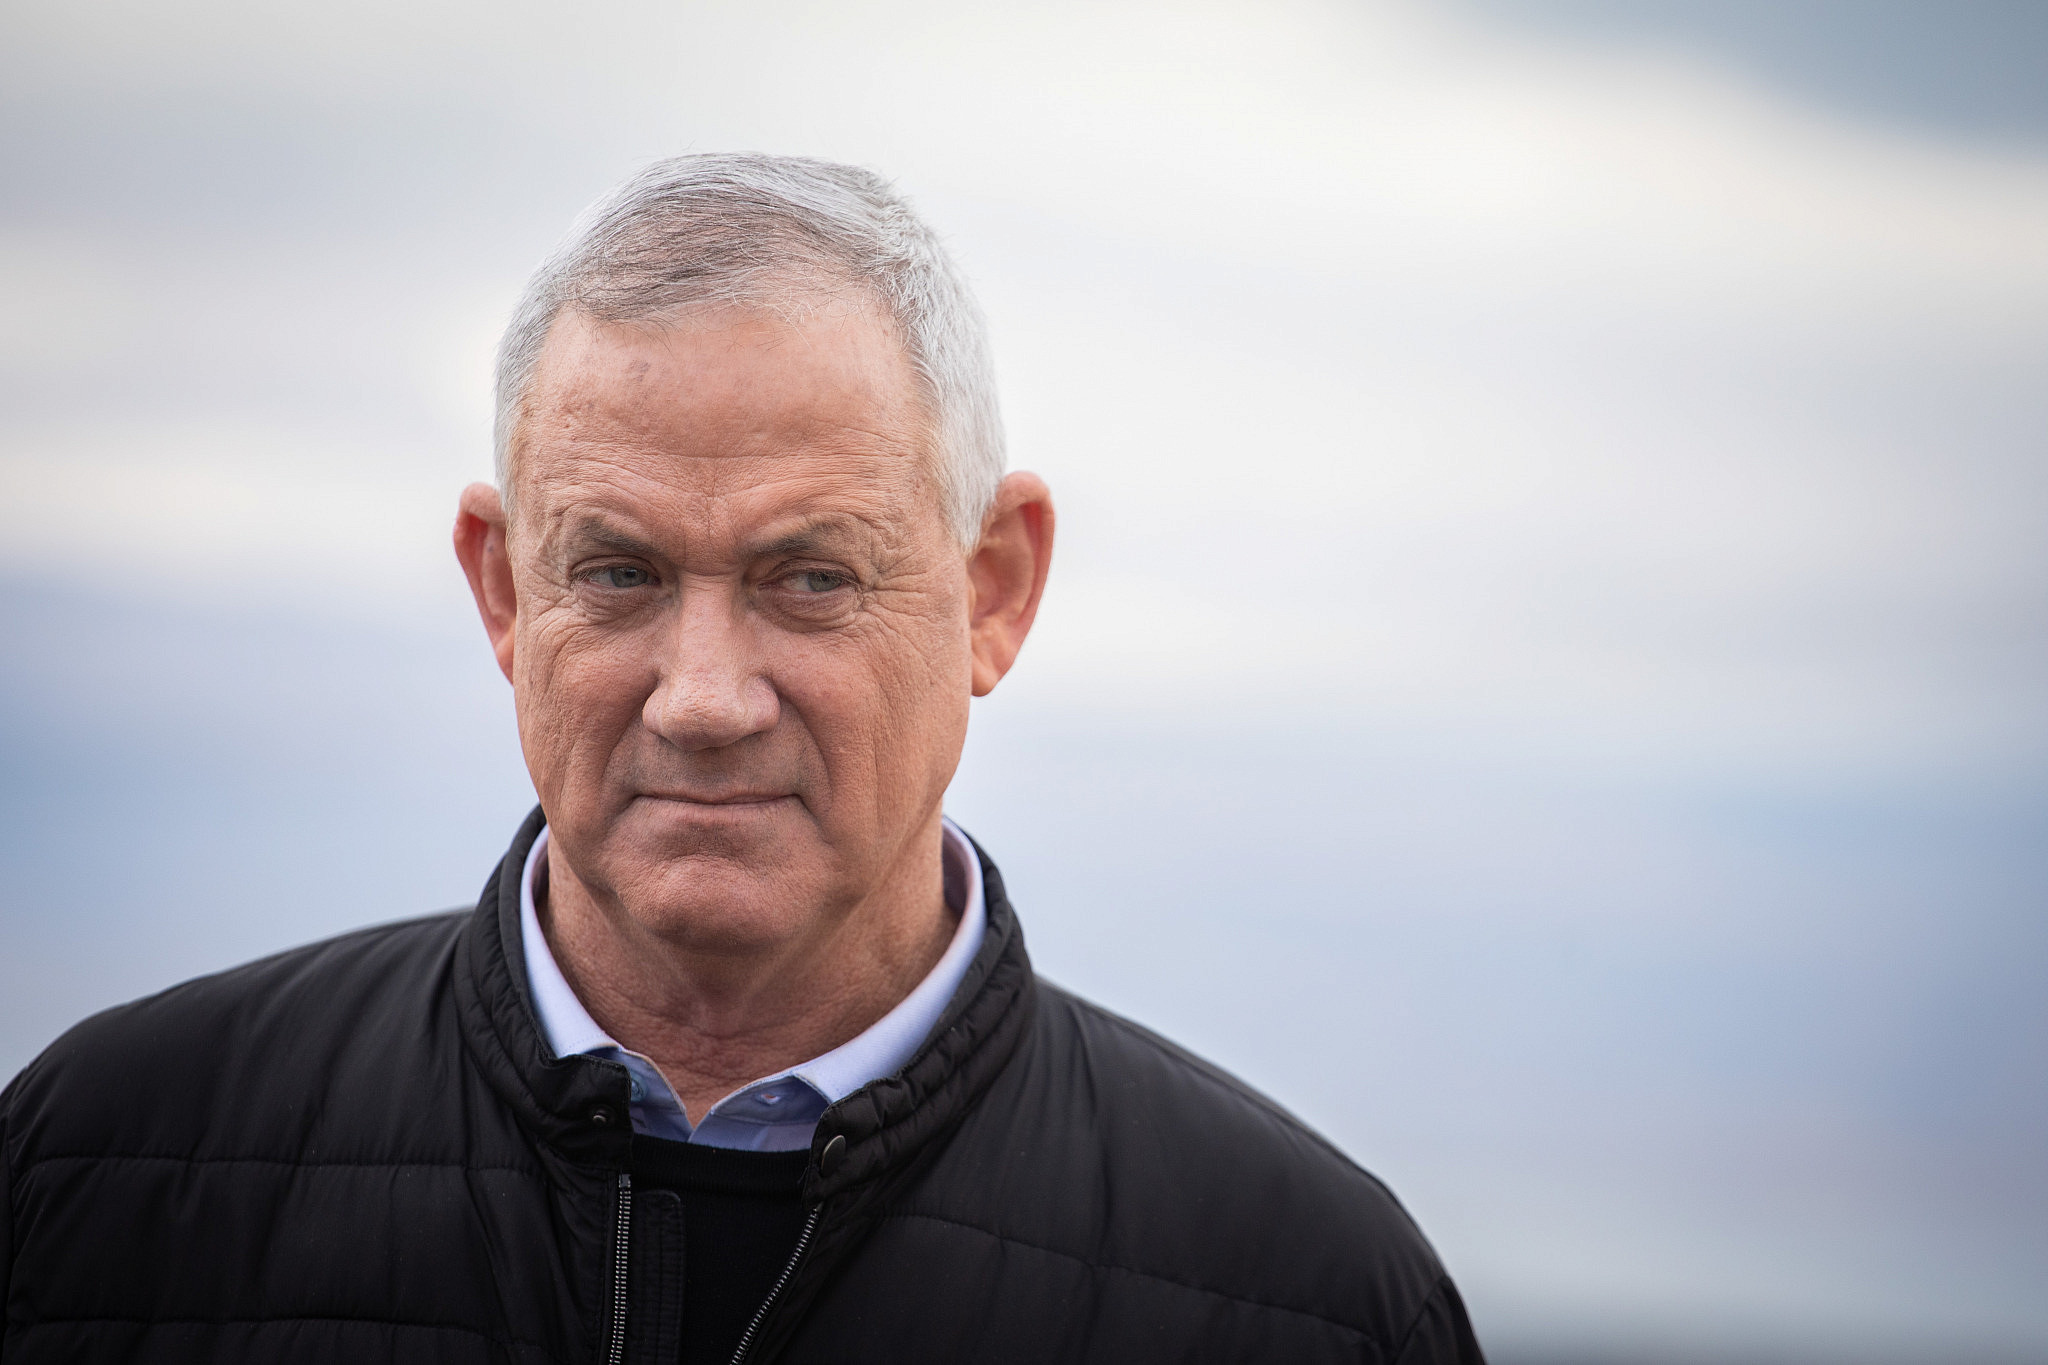 Blue and White party leader Benny Gantz seen during a visit in the settlement of Vered Yeriho, in the Jordan Valley, January 21, 2020. (Hadas Parush/Flash90)